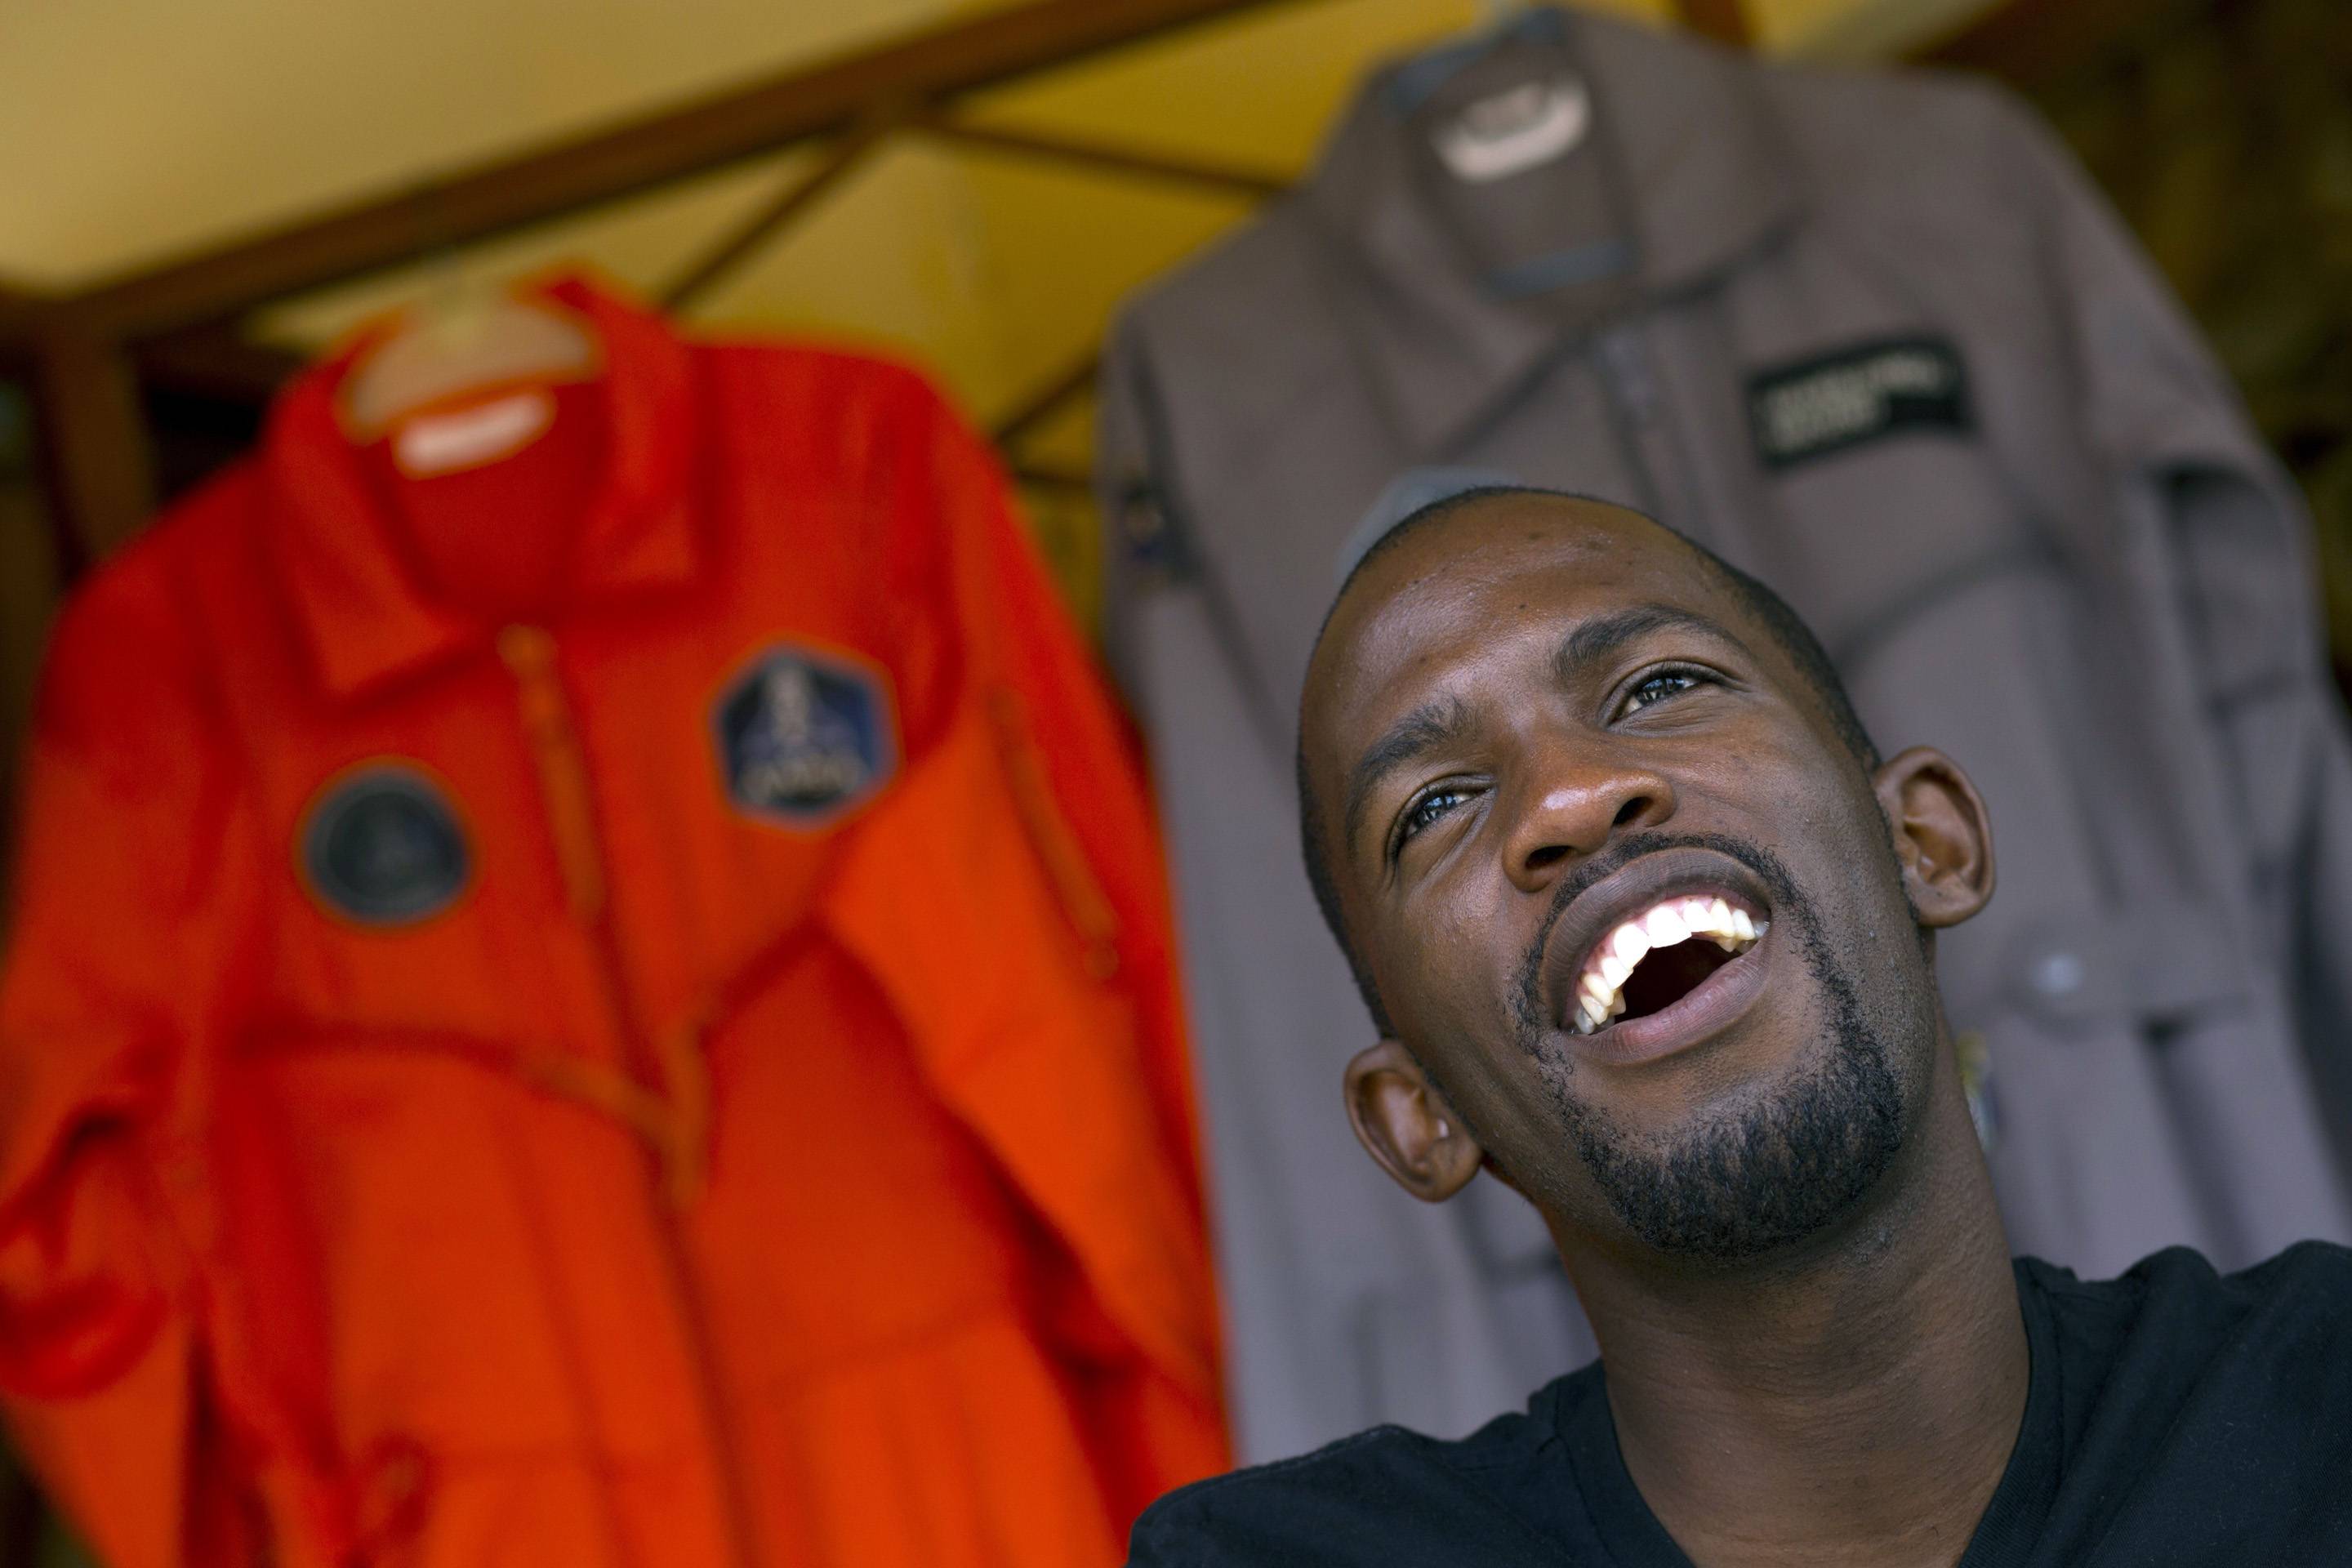 Blast Off: A Look at Blacks Who Made History in Outer Space - After entering the Lynx Apollo Space Academy competition, South African Mandla Maseko, 25, was one of 23 people selected to be blasted 62 miles up on a sub-orbital flight aboard a Lynx Mark II shuttle in 2015. He will be the first Black African to go to space. Keep reading to check out other Blacks who made out-of-this-world history. — Dominique Zonyéé (@DominiqueZonyee)&nbsp; &nbsp;(Photo: ALEXANDER JOE/AFP/Getty Images)